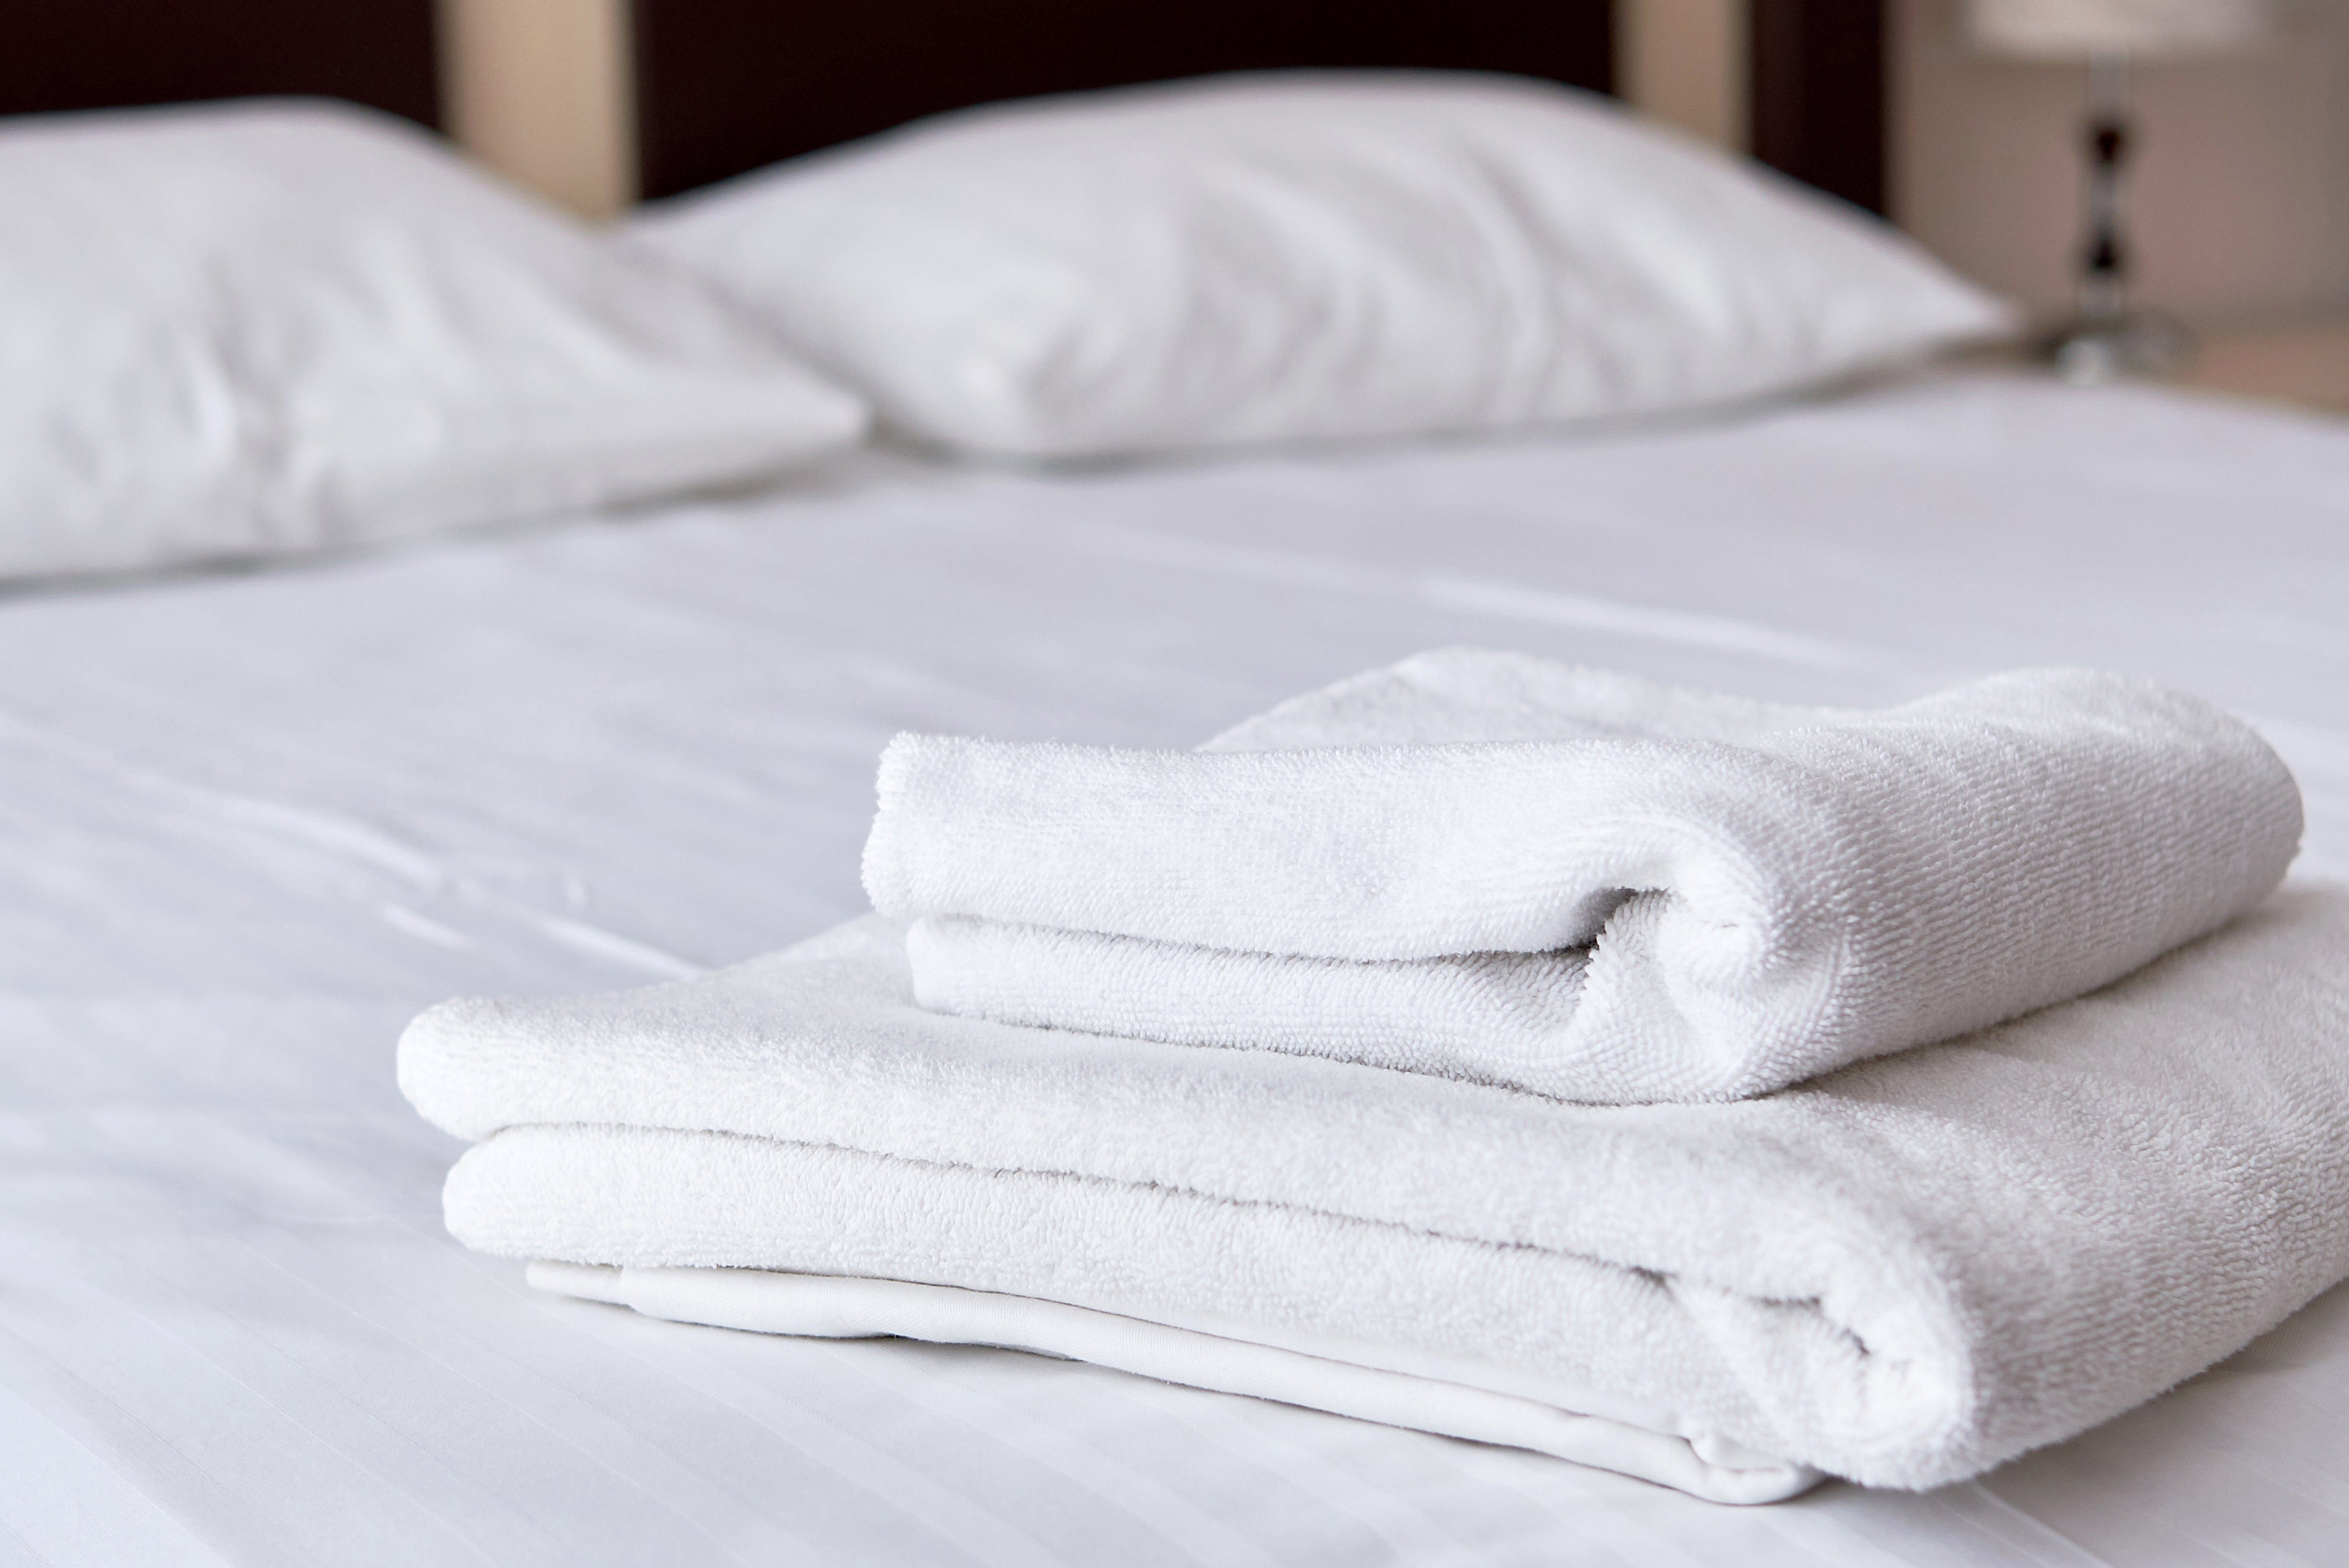 Close up of stack of white clean bath towels on bed sheet in modern hotel bedroom interior, copy space